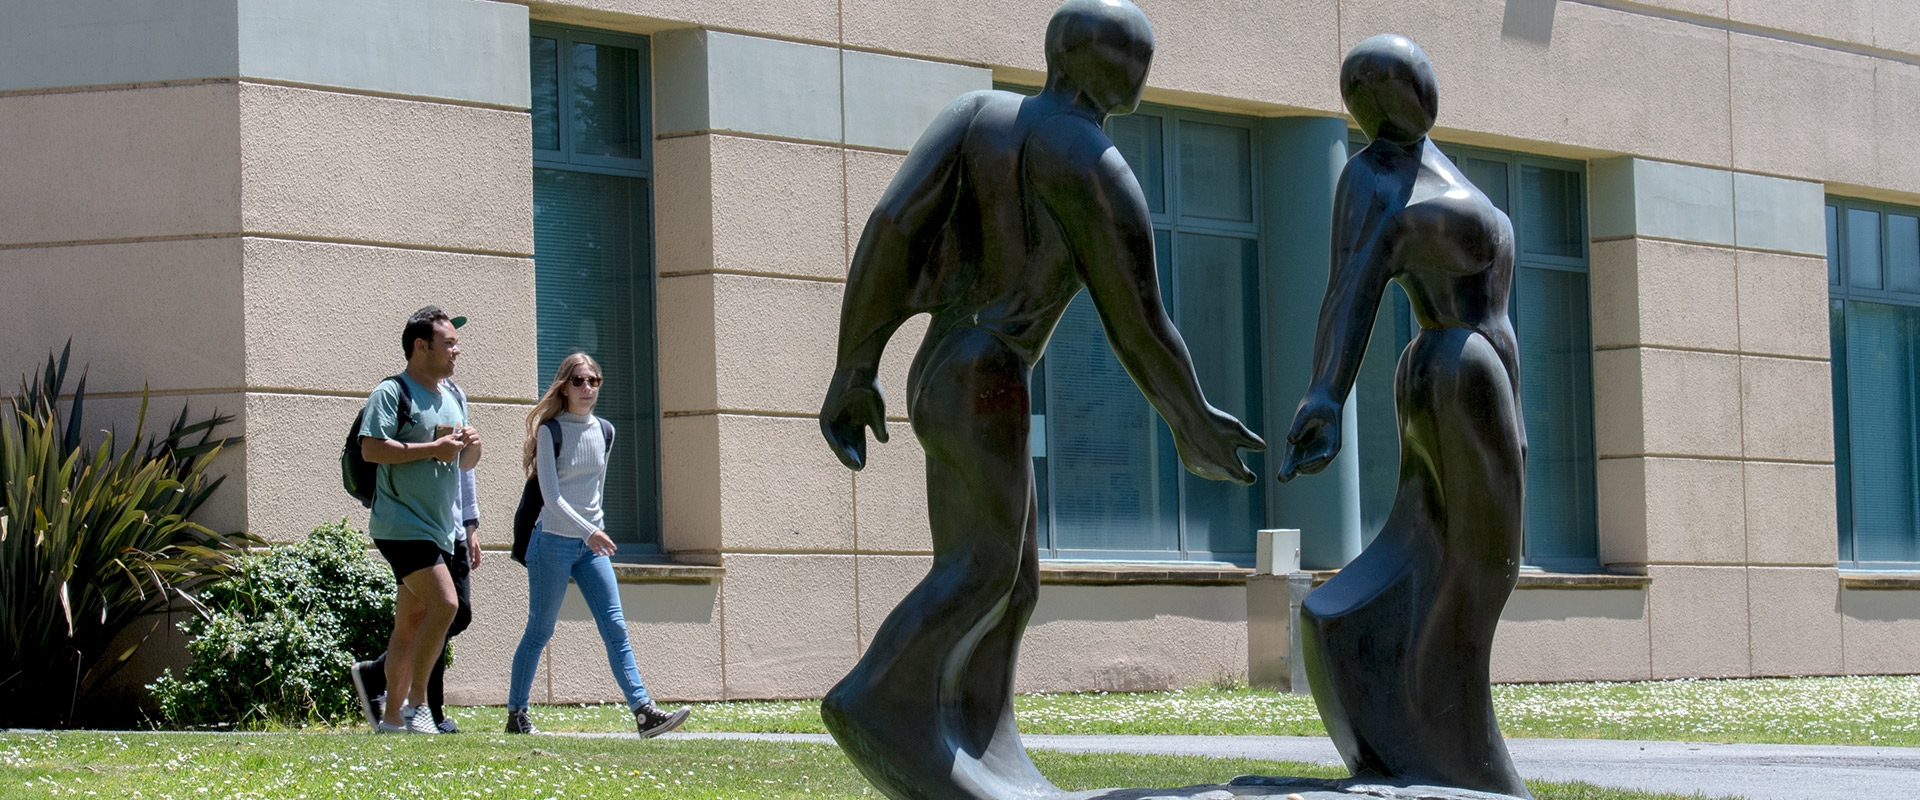 Couple walks on campus in the background of a couple sculpture